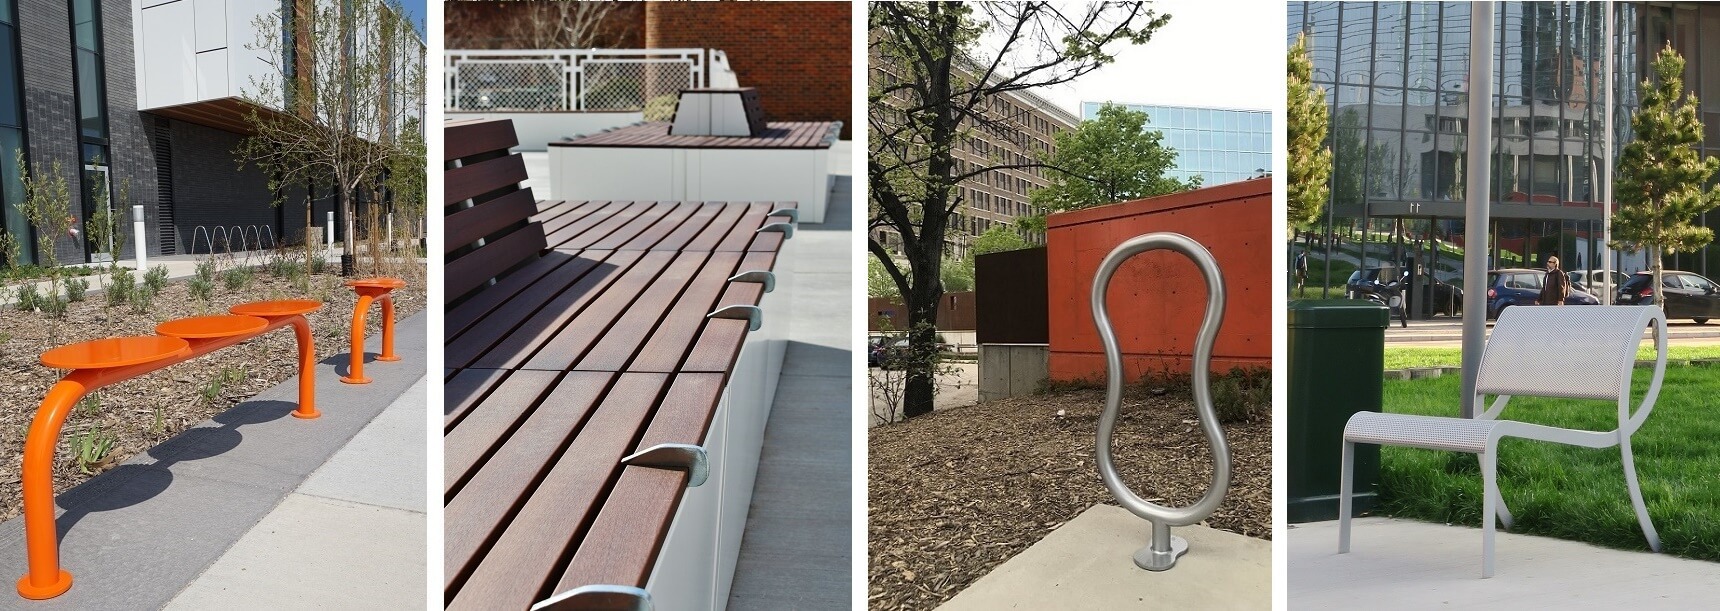 Street furniture - Seating and More